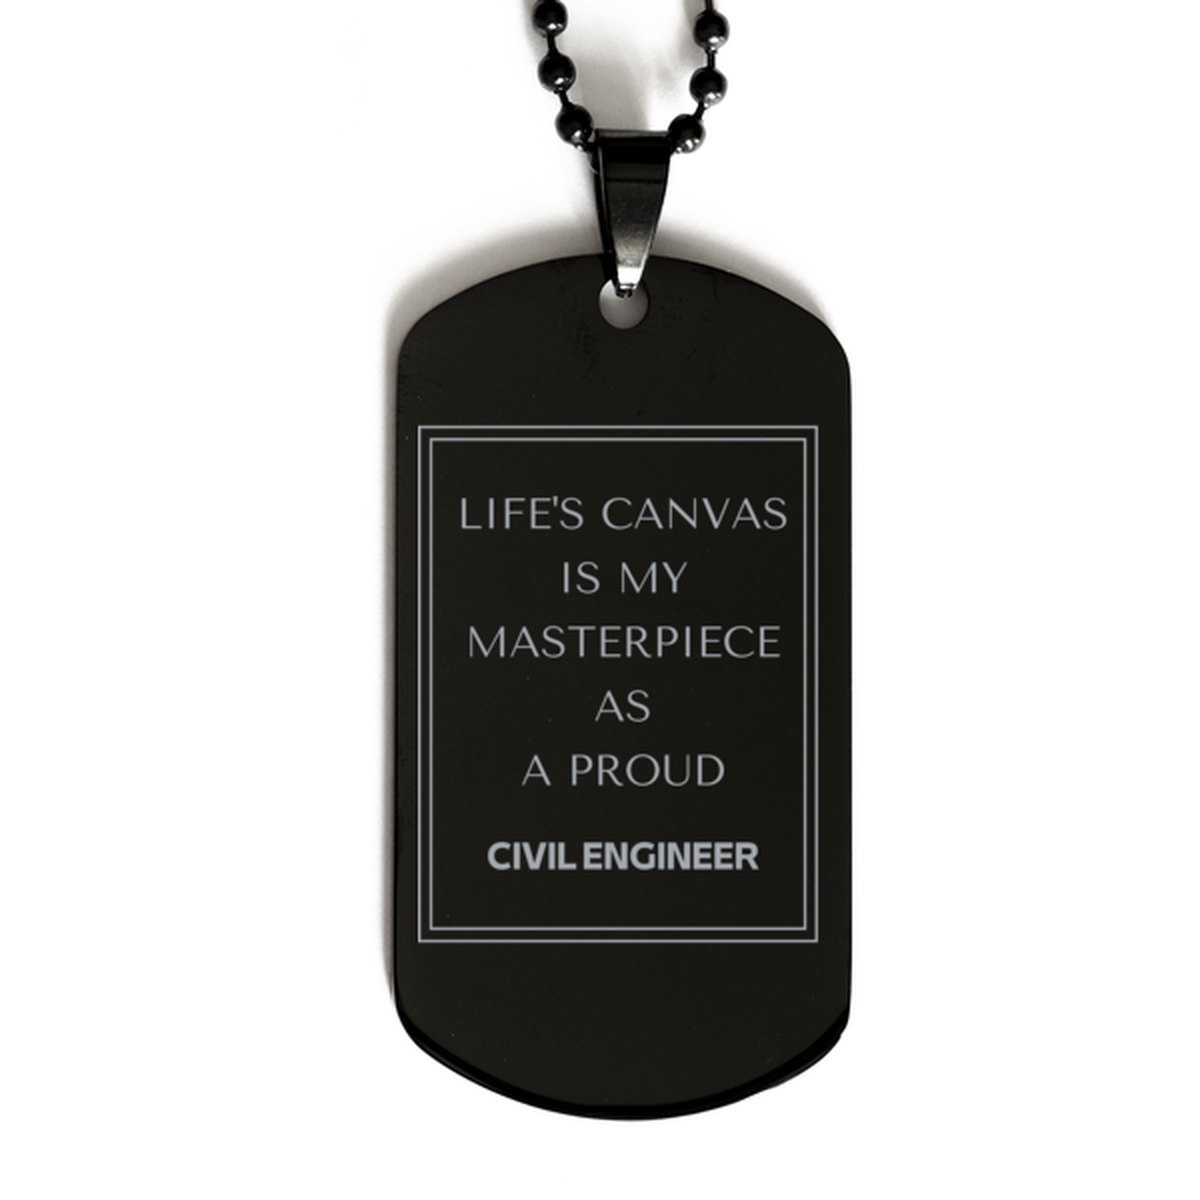 Proud Civil Engineer Gifts, Life's canvas is my masterpiece, Epic Birthday Christmas Unique Black Dog Tag For Civil Engineer, Coworkers, Men, Women, Friends